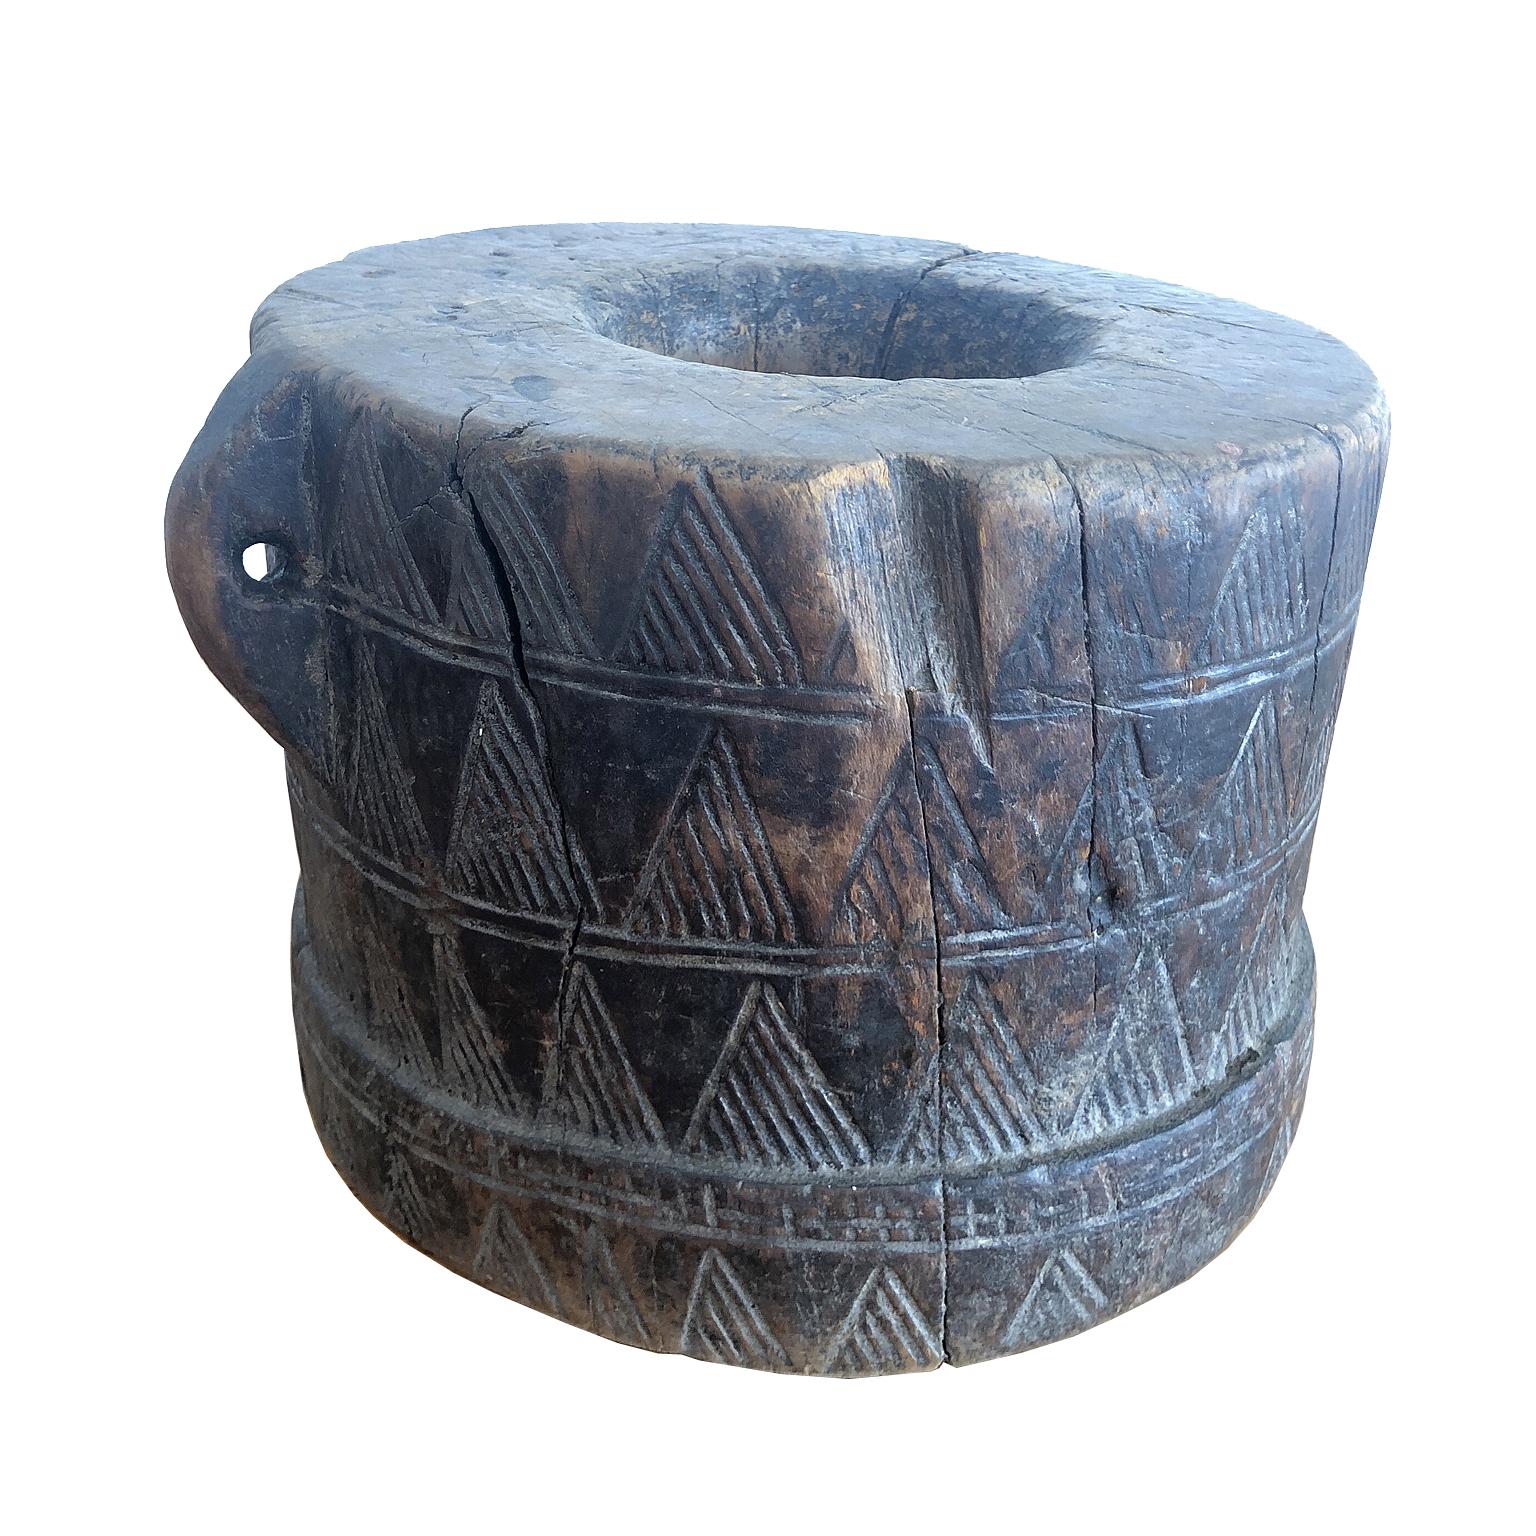 Ethiopian African Tribal Coffee Mortar in Carved Wood from the Kaffa People in Ethiopia